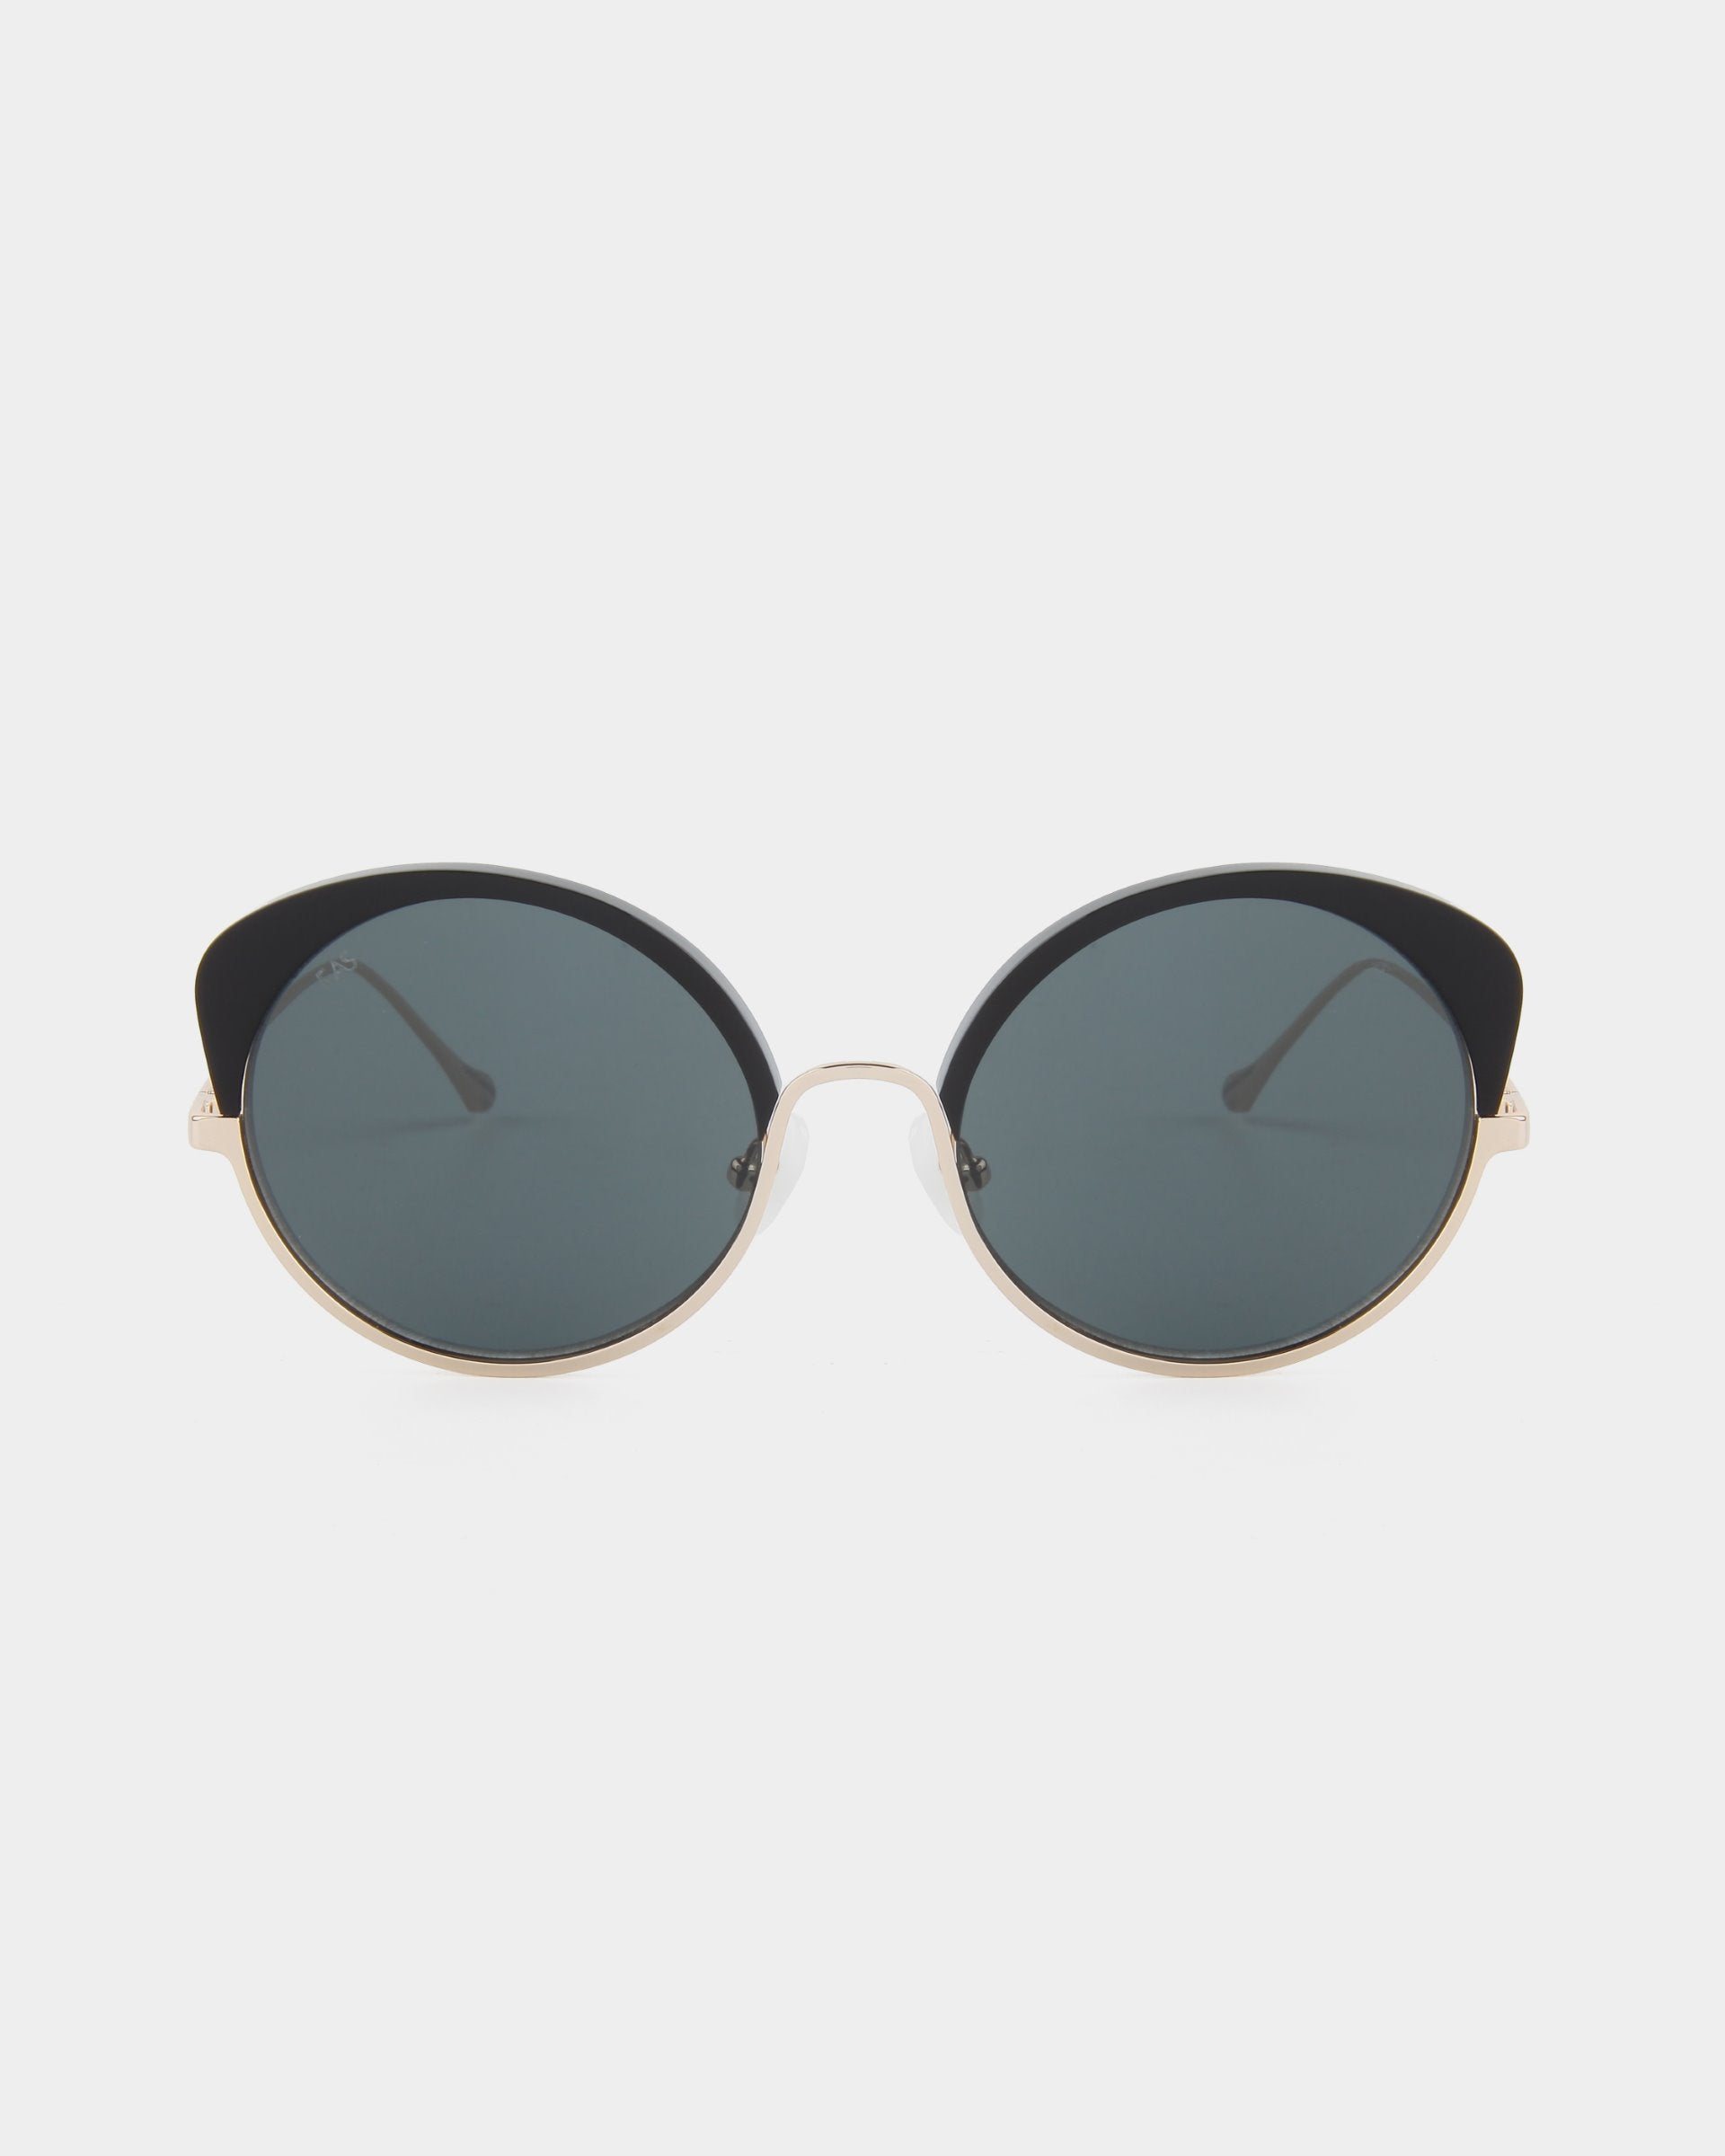 A pair of stylish Cocoon by For Art&#39;s Sake® sunglasses with black frames and dark tinted lenses, set against a plain white background. The temples are thin and metallic, adding to the sleek and modern design. This handcrafted eyewear also offers UV protection, ensuring both elegance and safety.